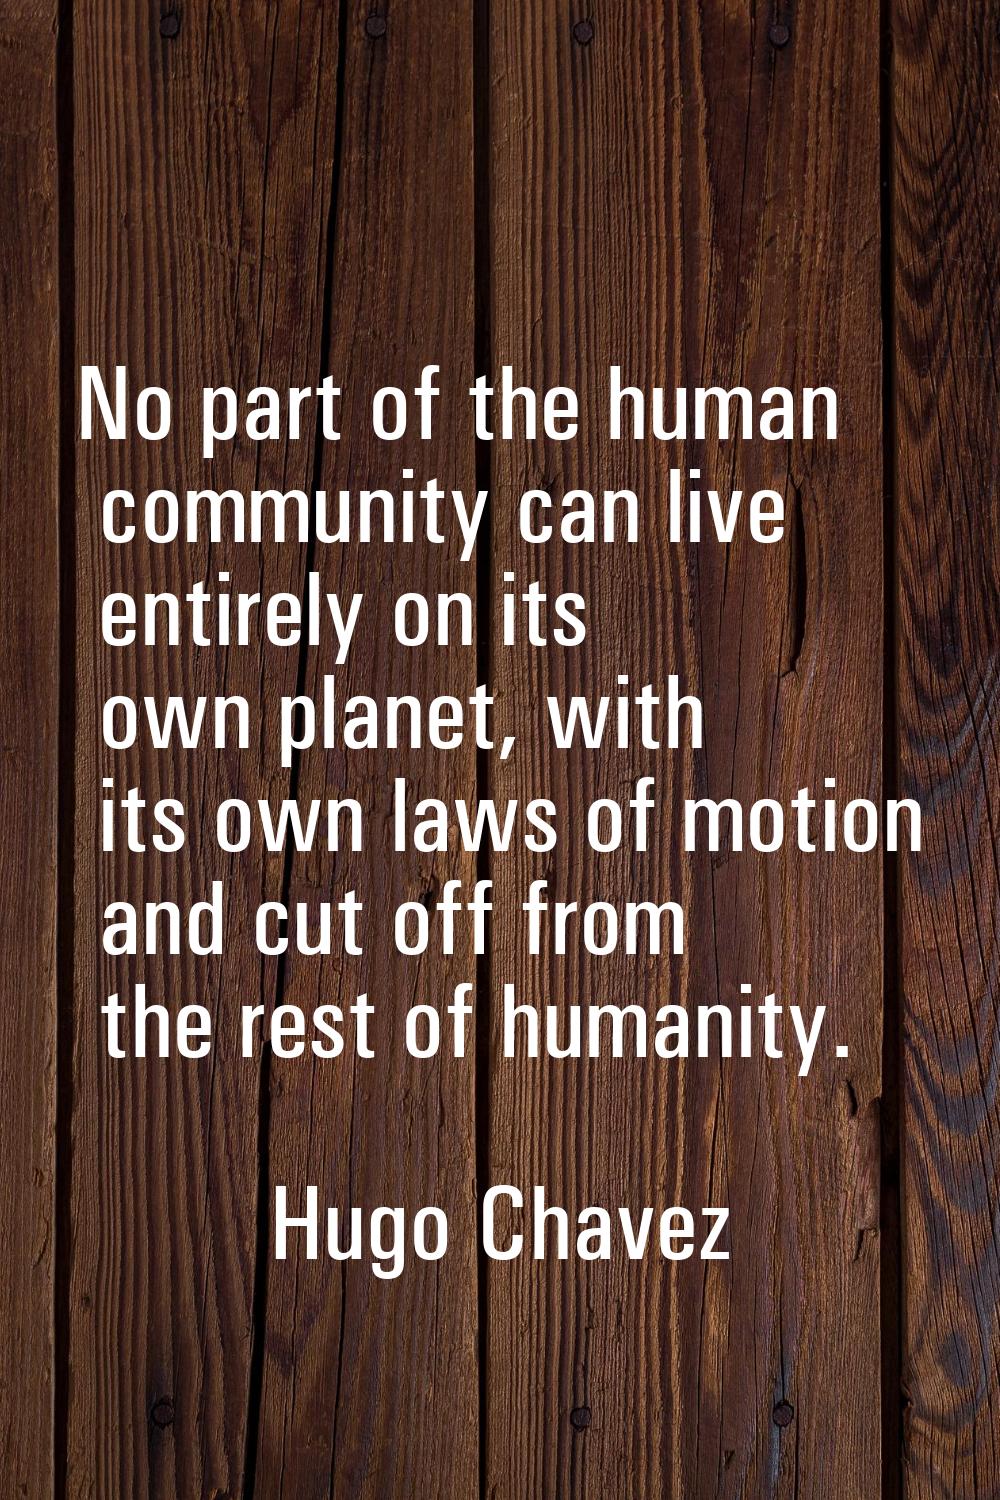 No part of the human community can live entirely on its own planet, with its own laws of motion and